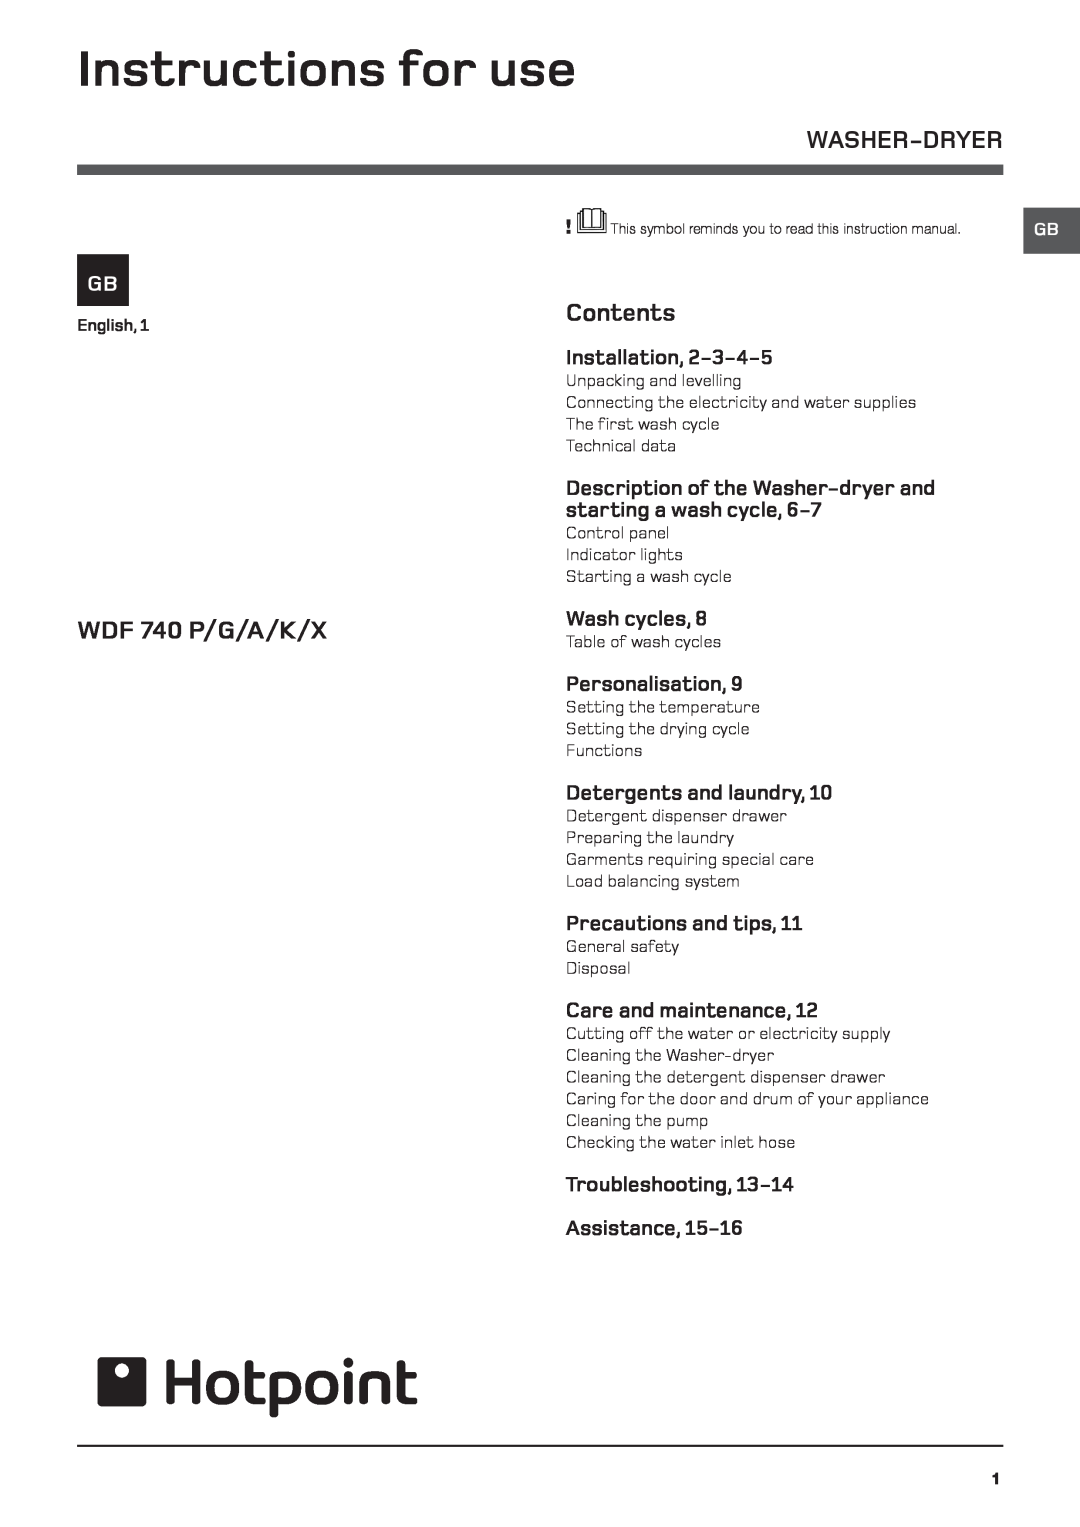 Hotpoint WDF 740 P/G/A/K/X instruction manual Instructions for use, Installation, Wash cycles, Personalisation, Contents 